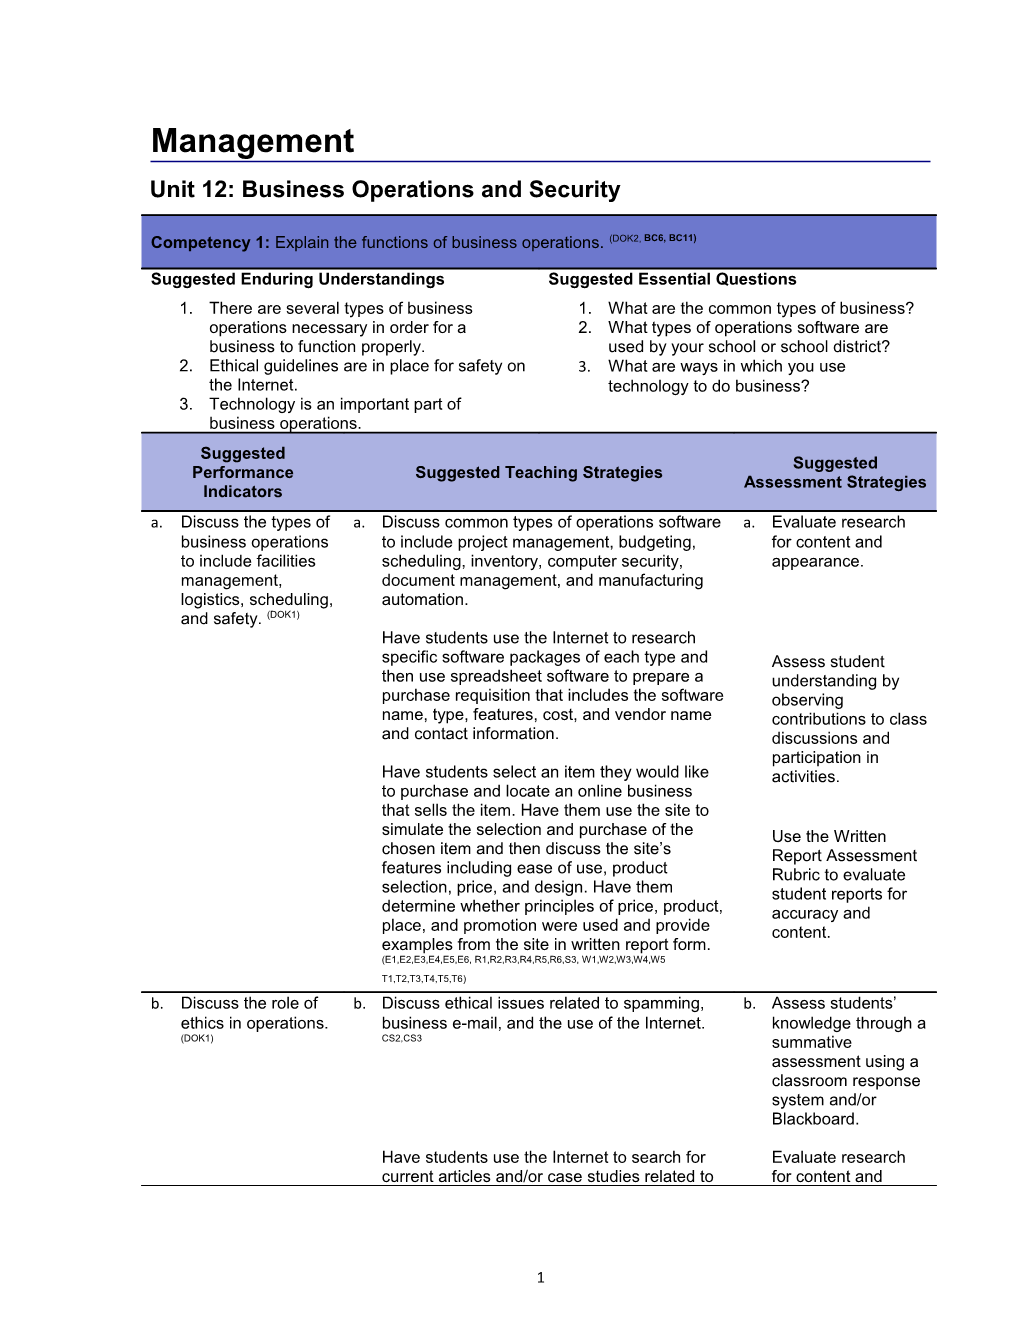 Unit 12: Business Operations and Security